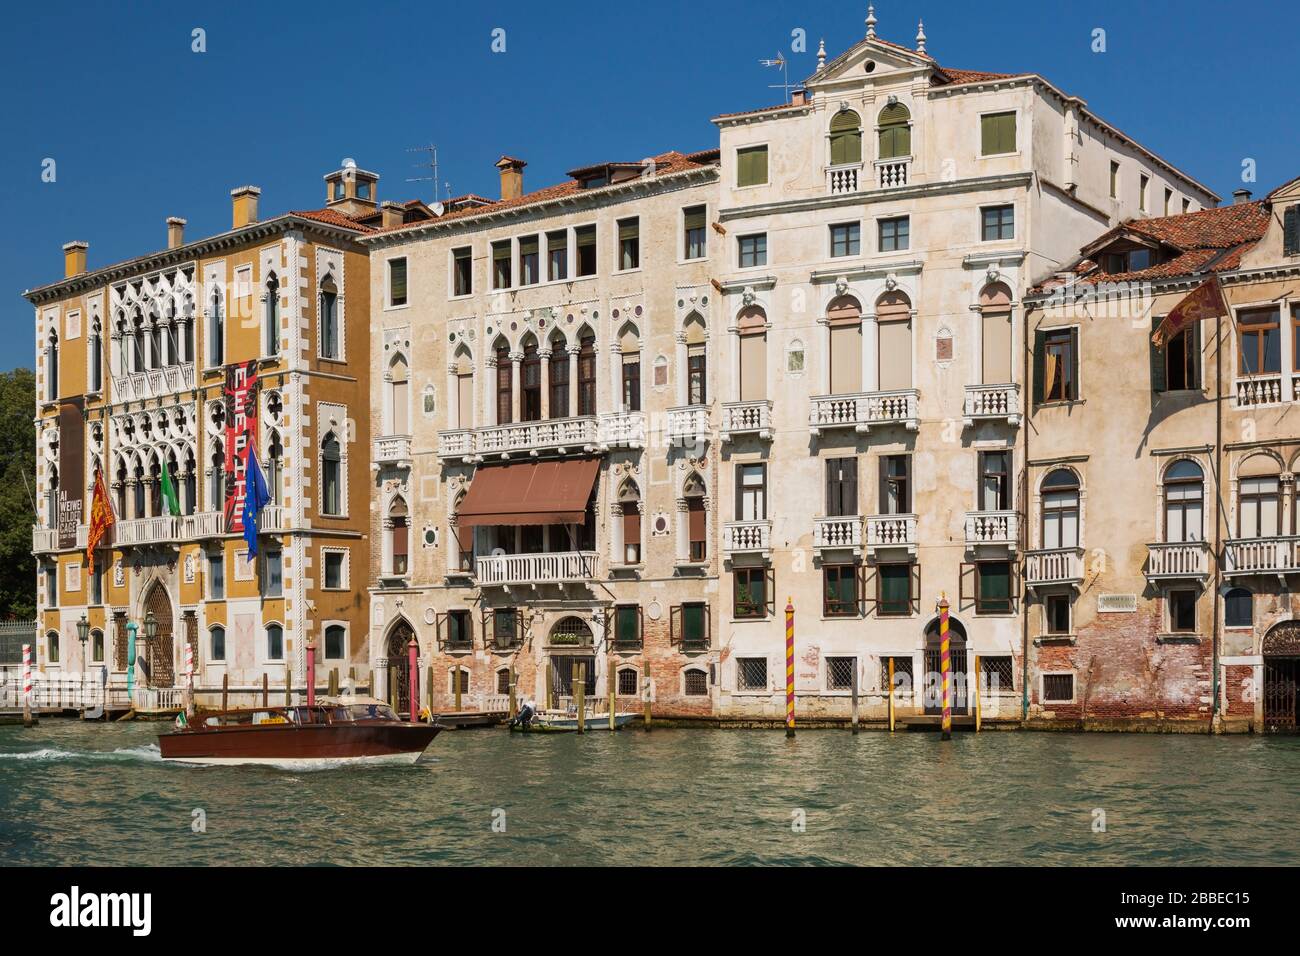 Water taxi on Grand Canal and moored boats in front of Renaissance architectural style palace buildings including the Palazzo Cavalli-Franchetti palace, San Marco, Venice, Veneto, Italy Stock Photo